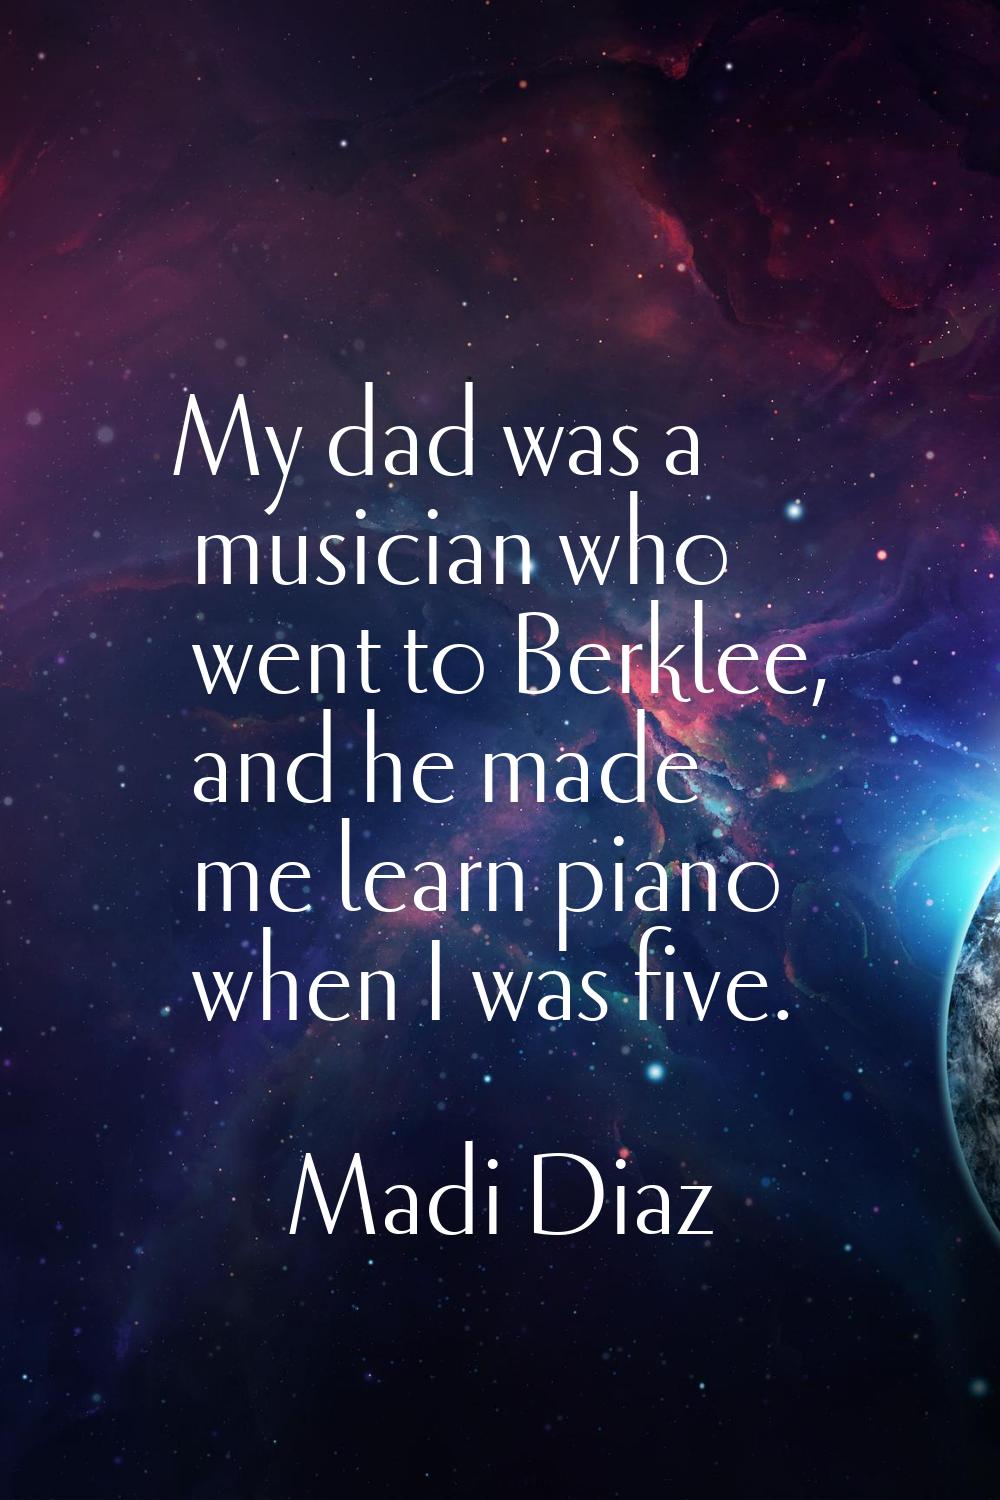 My dad was a musician who went to Berklee, and he made me learn piano when I was five.